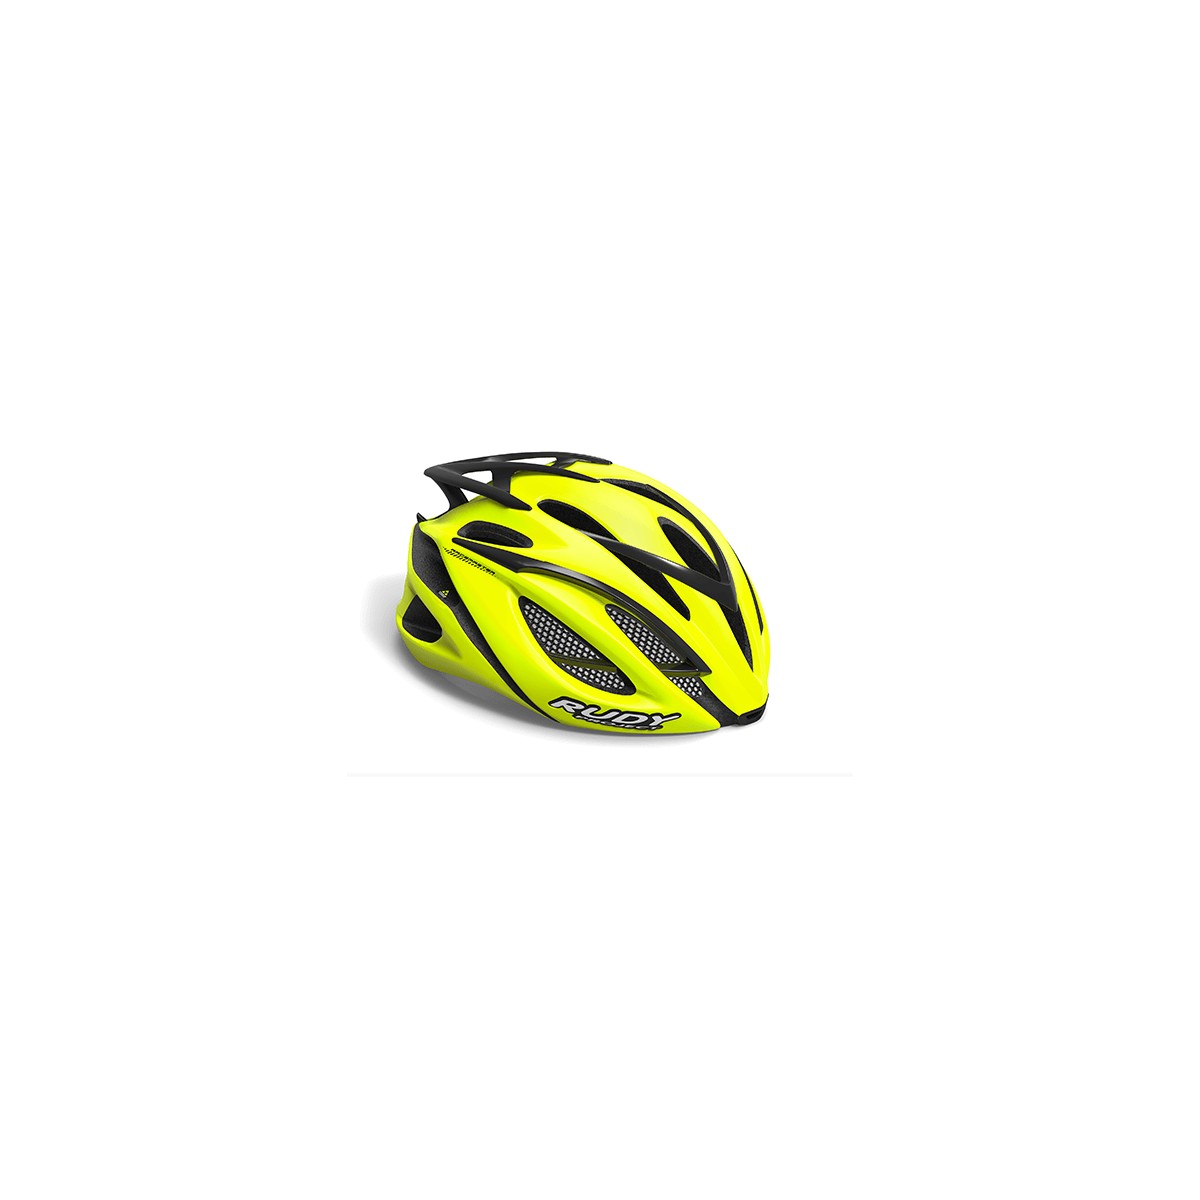 Rudy Project Racemaster helmet black / lime yellow